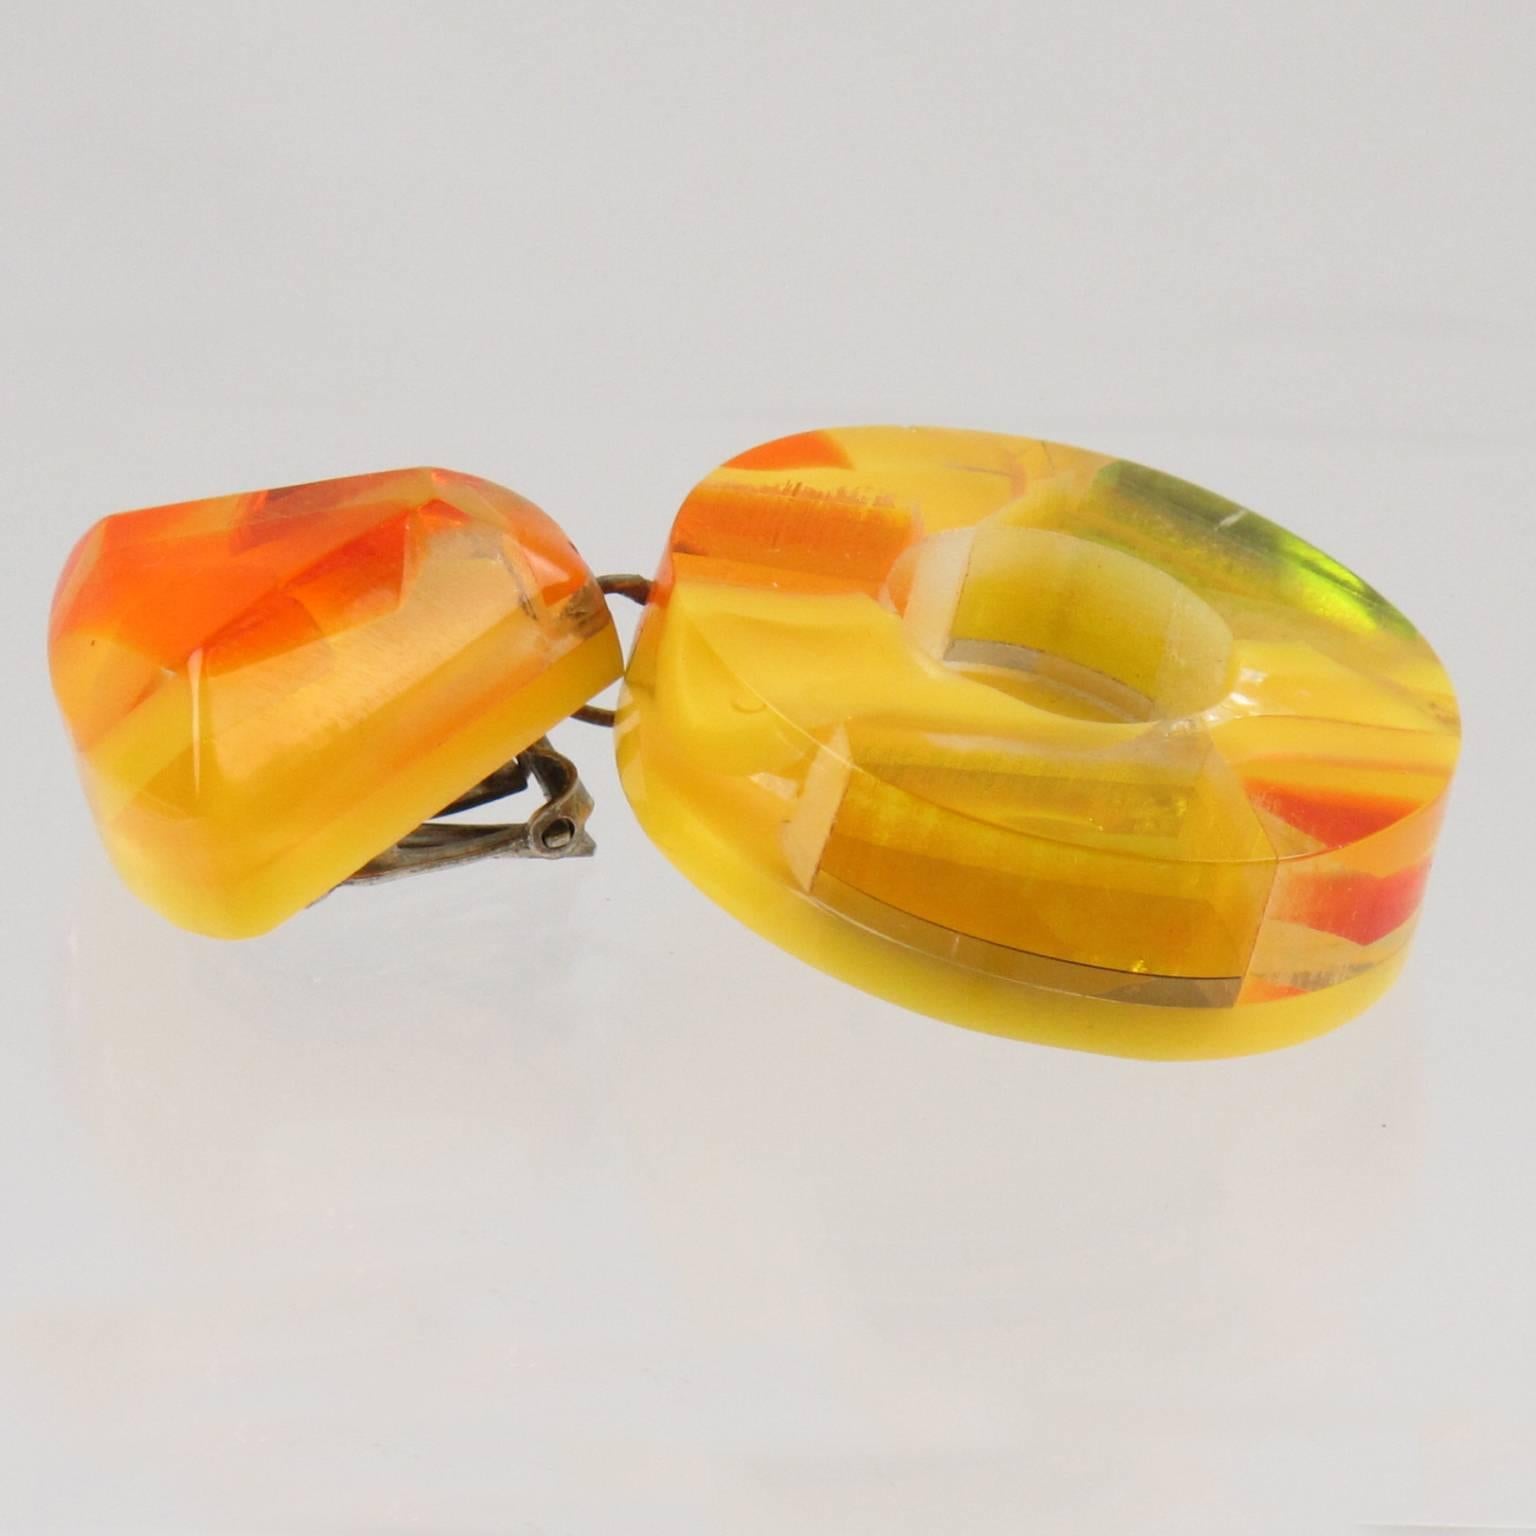 Dangle Loop Lucite Clip on Earrings by Harriet Bauknight for Kaso Sunny Colors 2